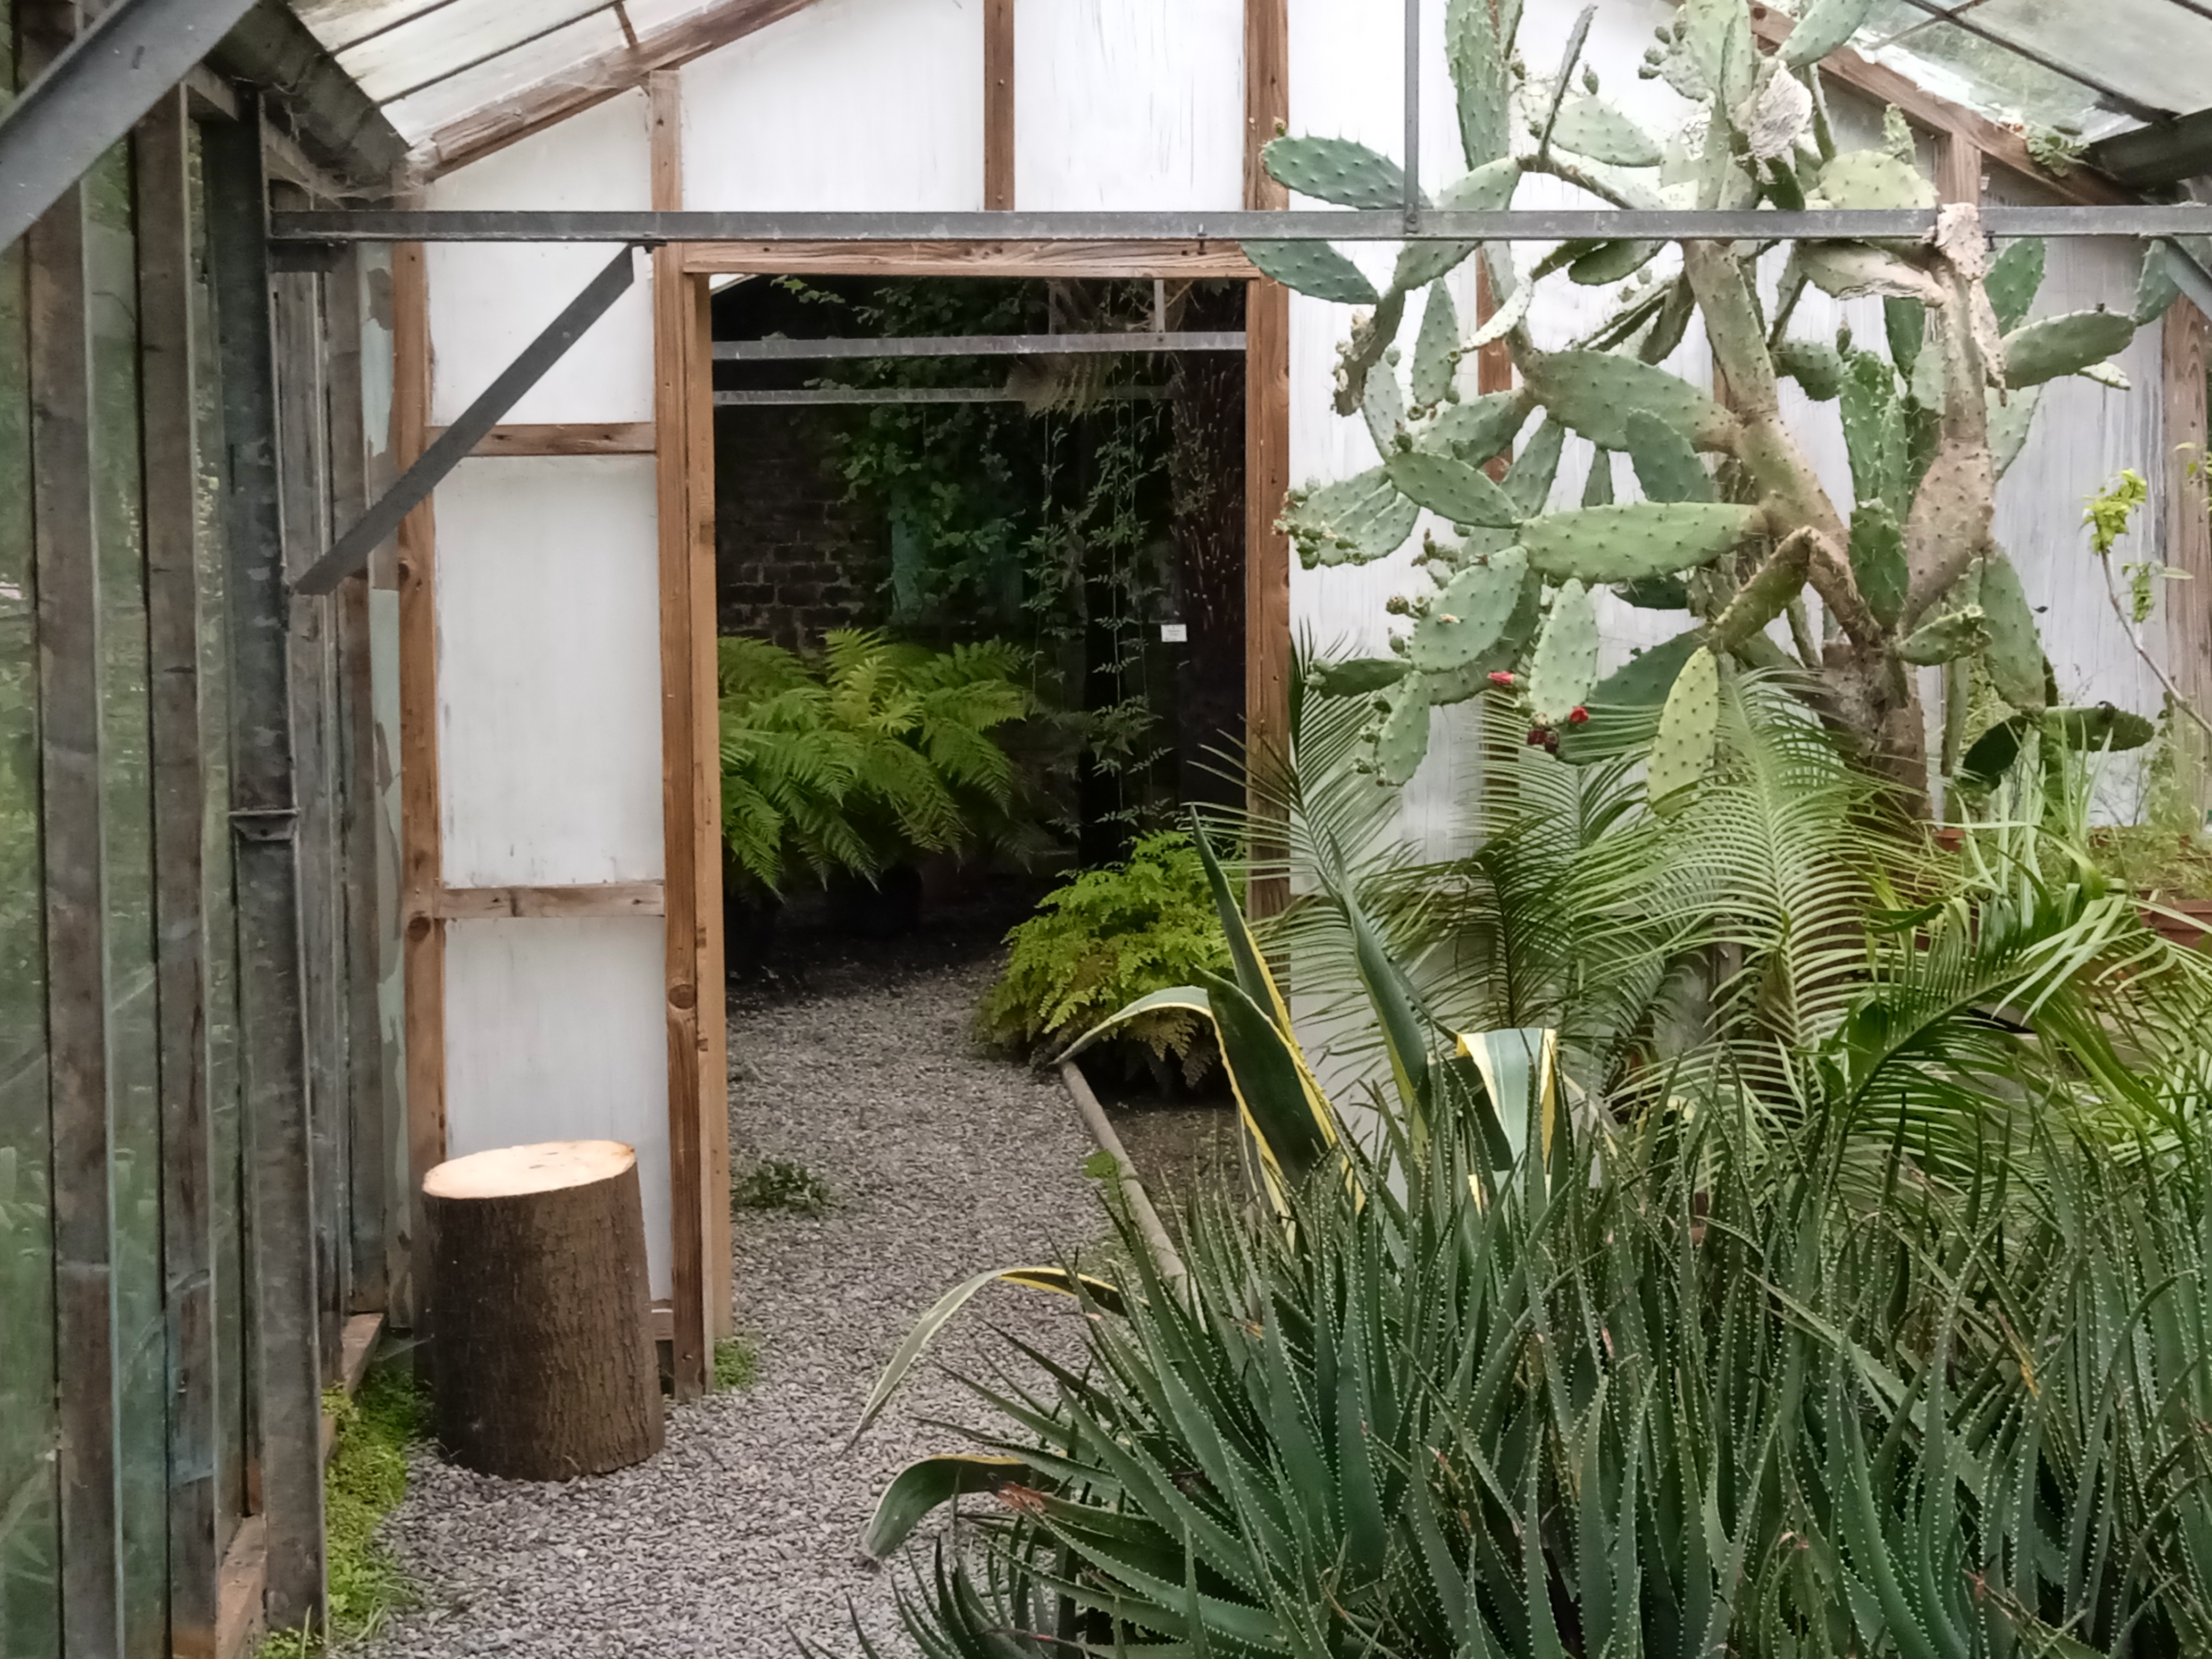 Image of Greenhouse with tree stump seating